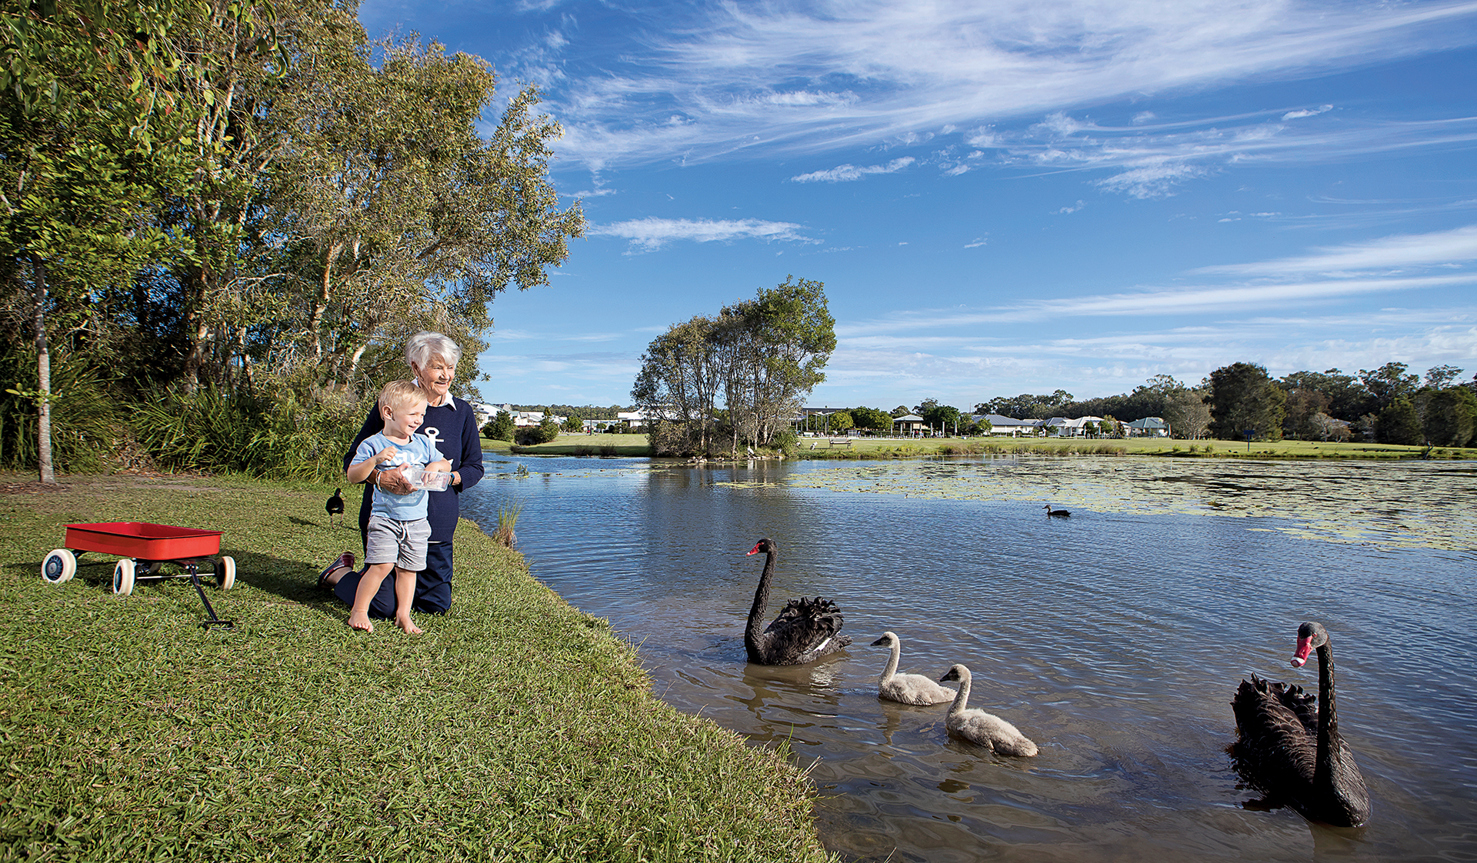 Halcyon Parks grandmother and young grandchild feeding swans at the lakes edge. there is a red wagon behind them. 